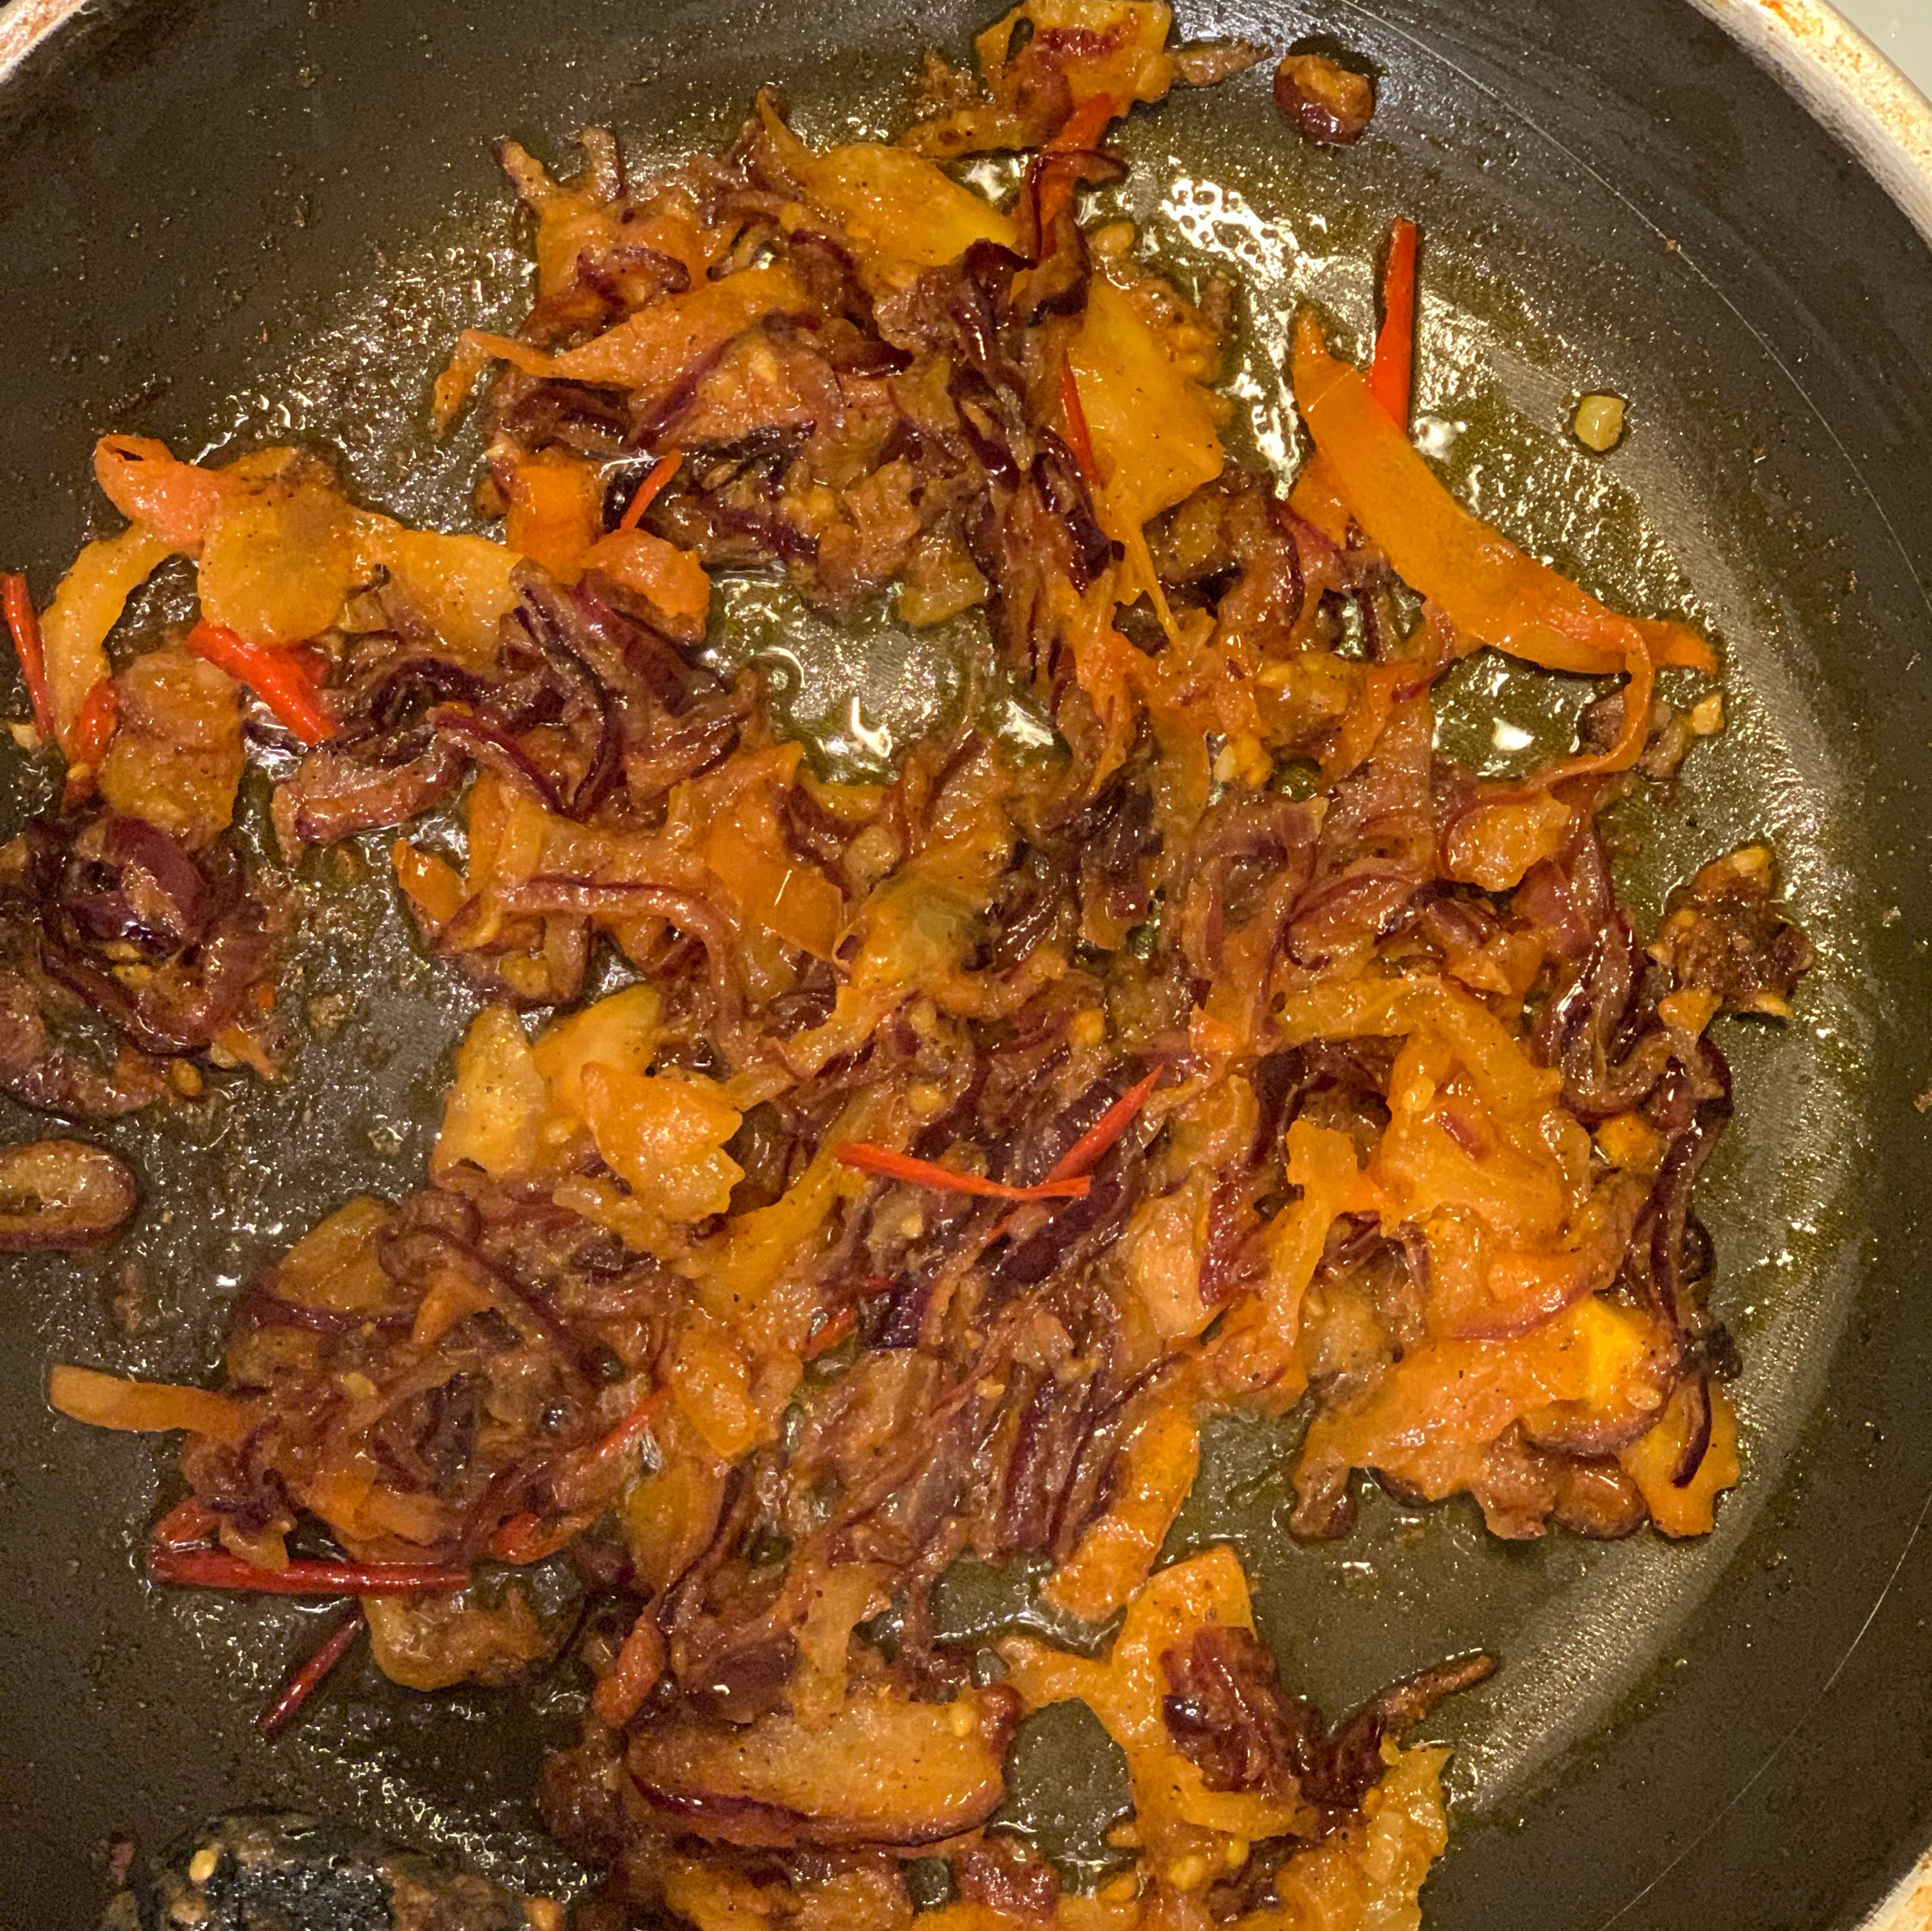 Add chopped tomatoes to the fried onions and add 1 tbsp turmeric, 1 tbsp ginger, 1 tbsp chilli powder and salt to taste. Keep stirring so that it is not burnt.